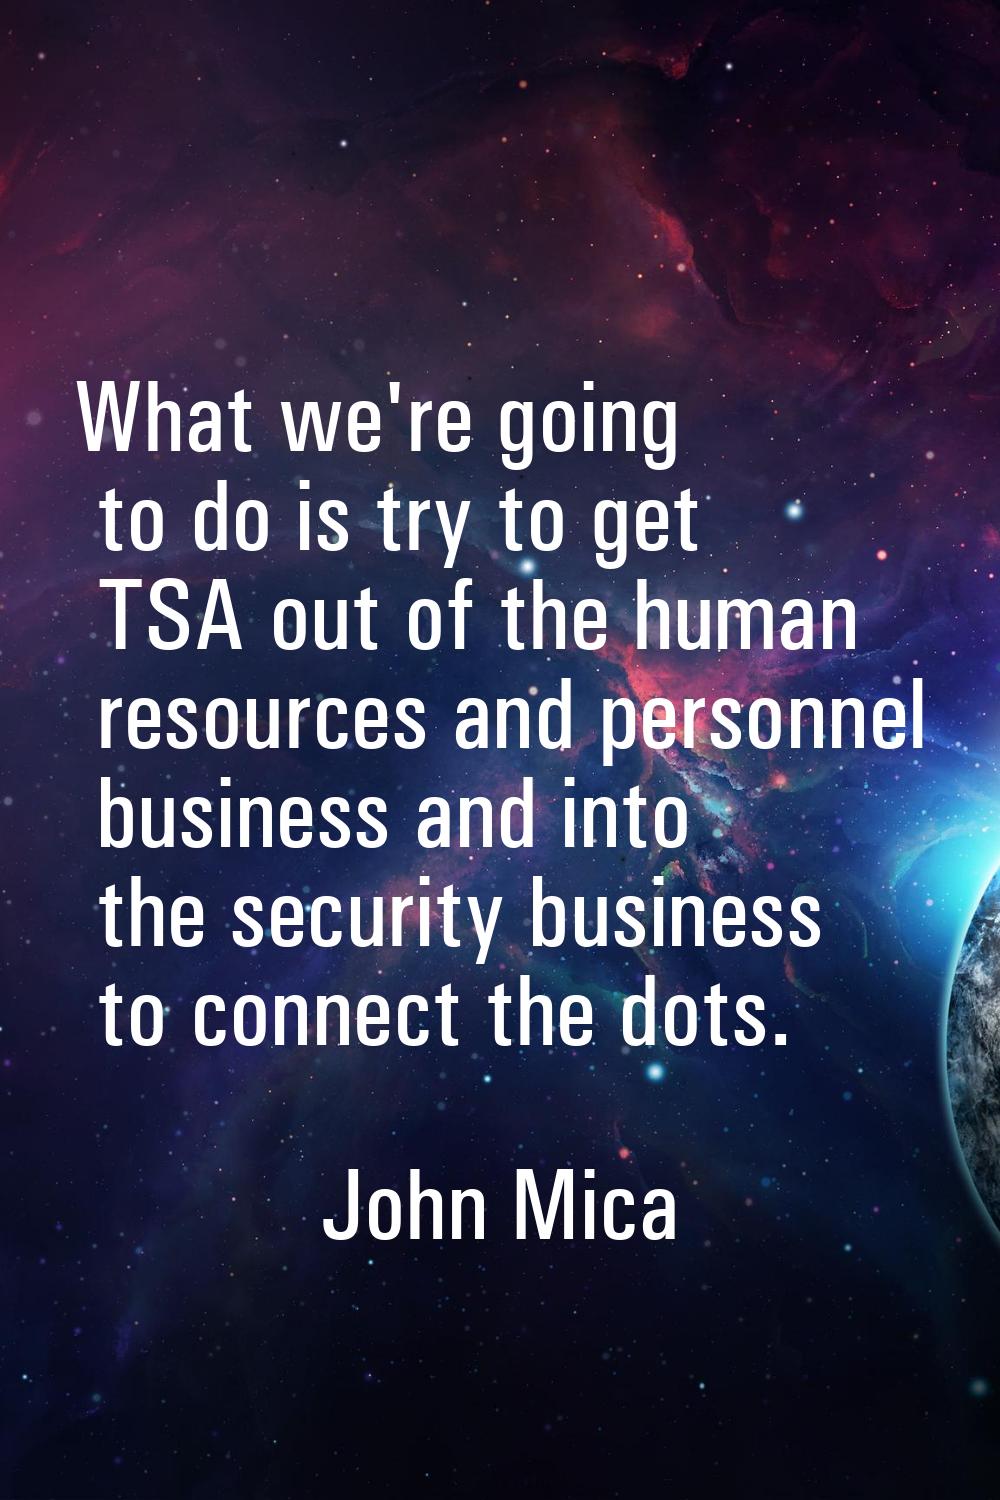 What we're going to do is try to get TSA out of the human resources and personnel business and into